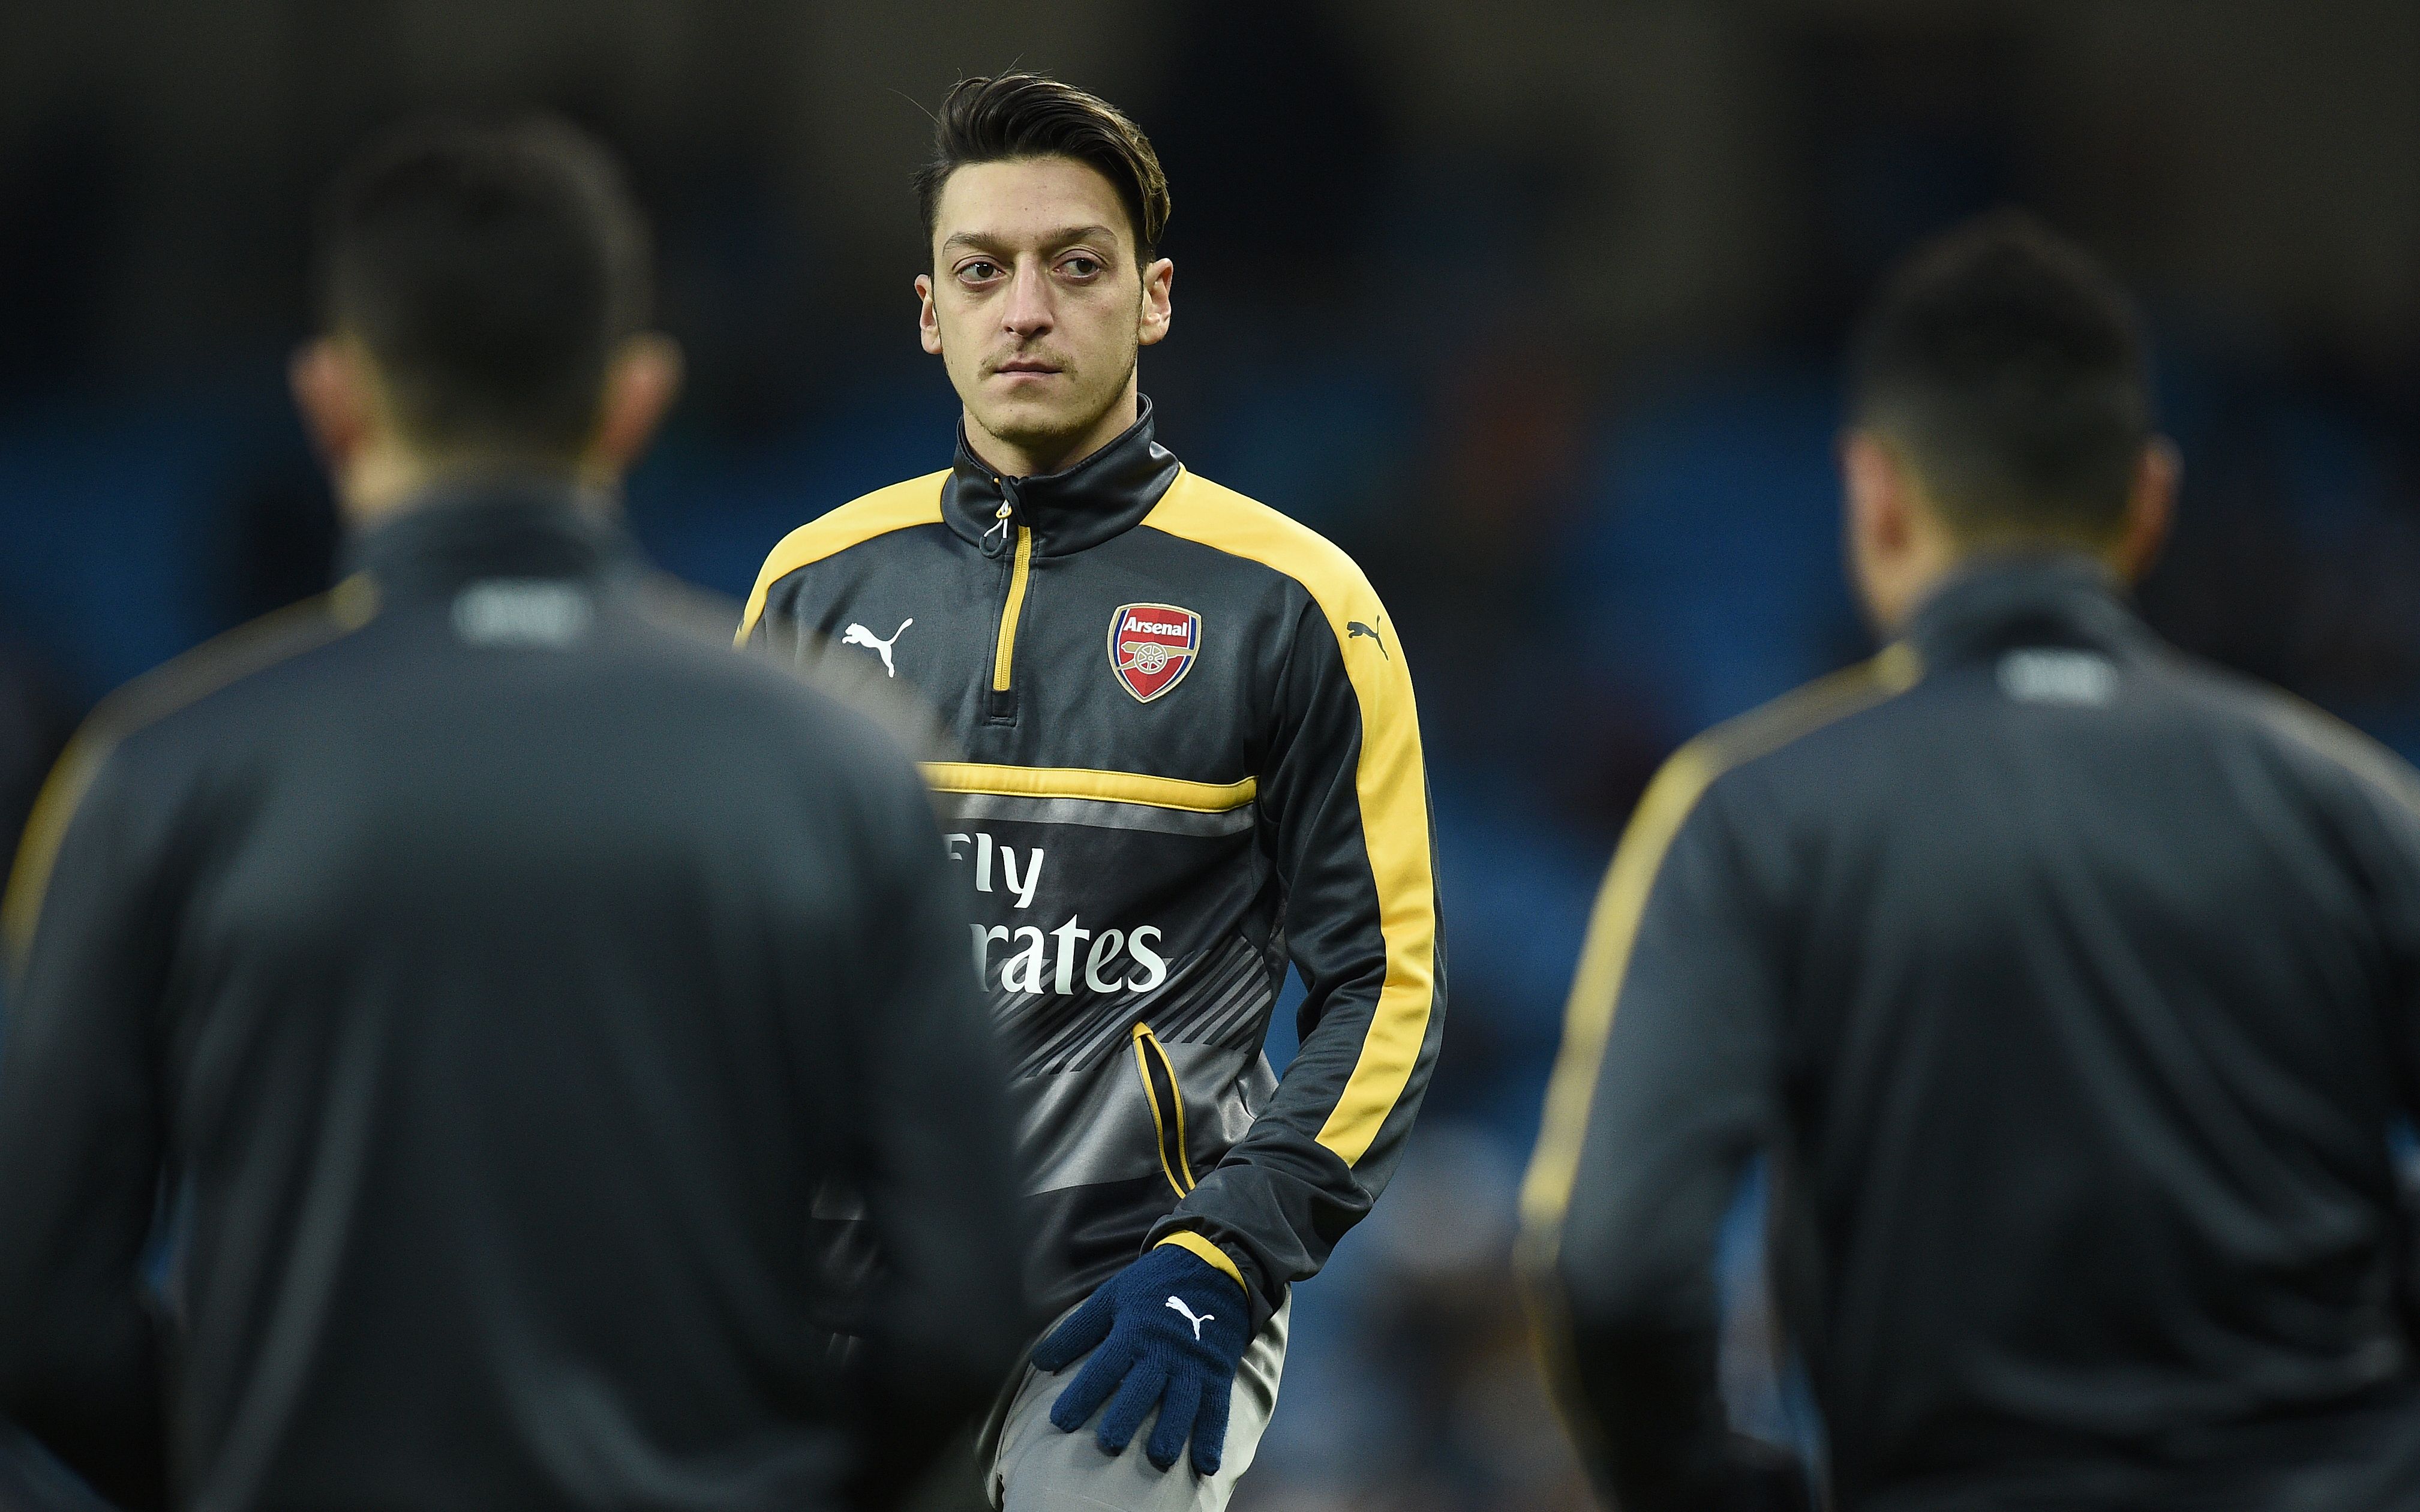 Arsenal's German midfielder Mesut Ozil warms up ahead of the English Premier League football match between Manchester City and Arsenal at the Etihad Stadium in Manchester, north west England, on December 18, 2016. (Photo by Oli Scarff/AFP/Getty Images)